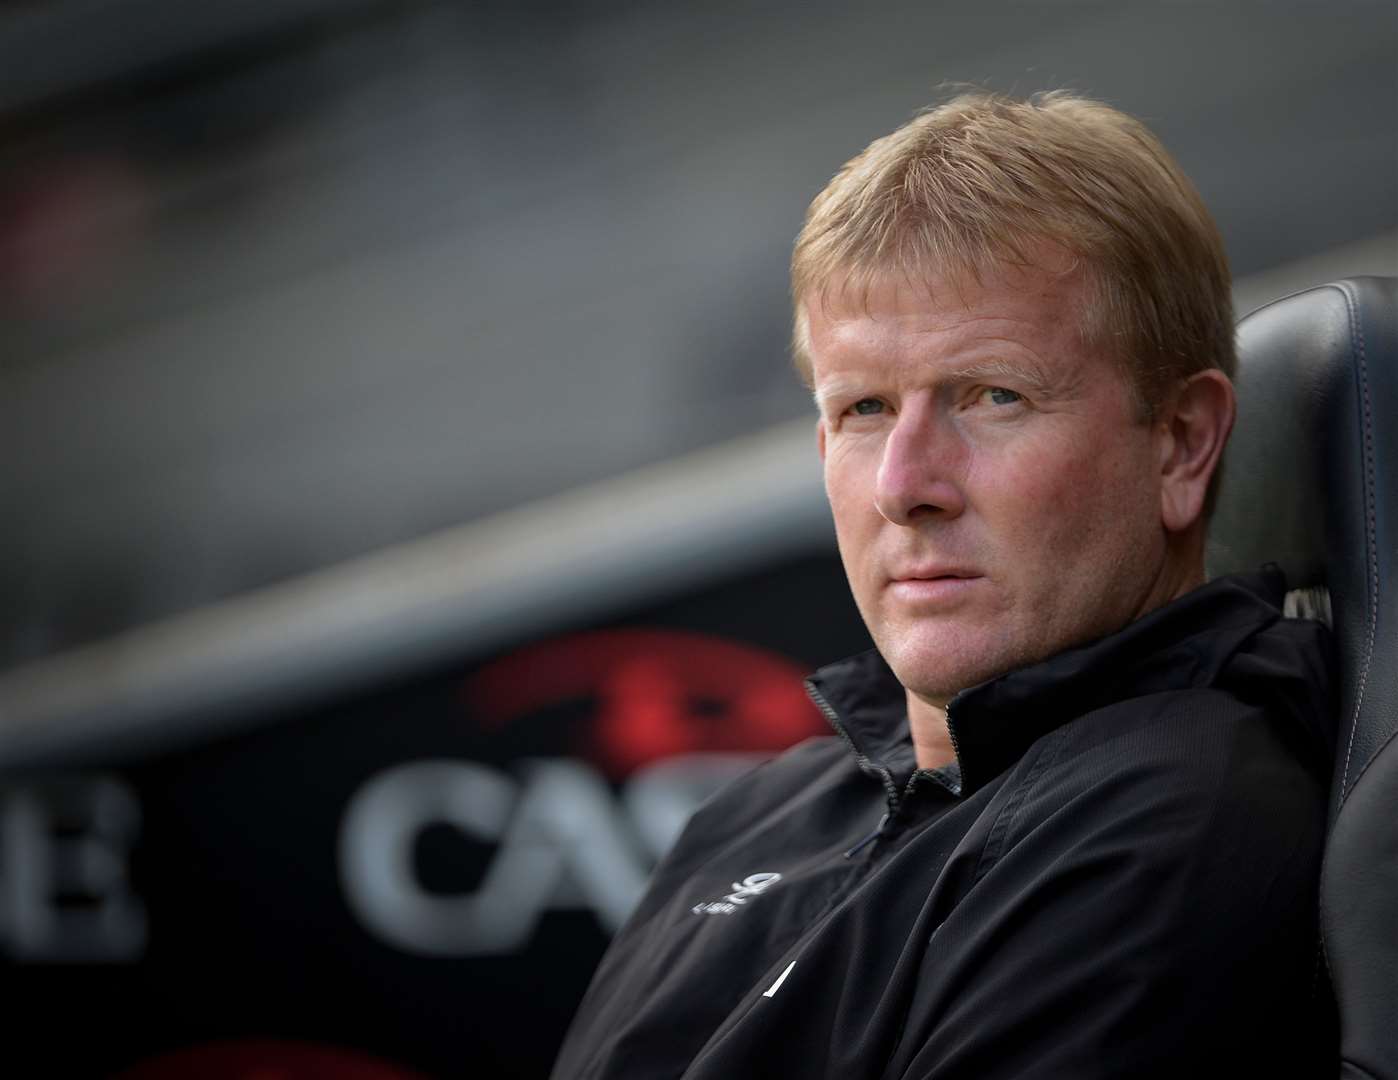 Former player Adrian Pennock had 30 league games in charge of the Gills